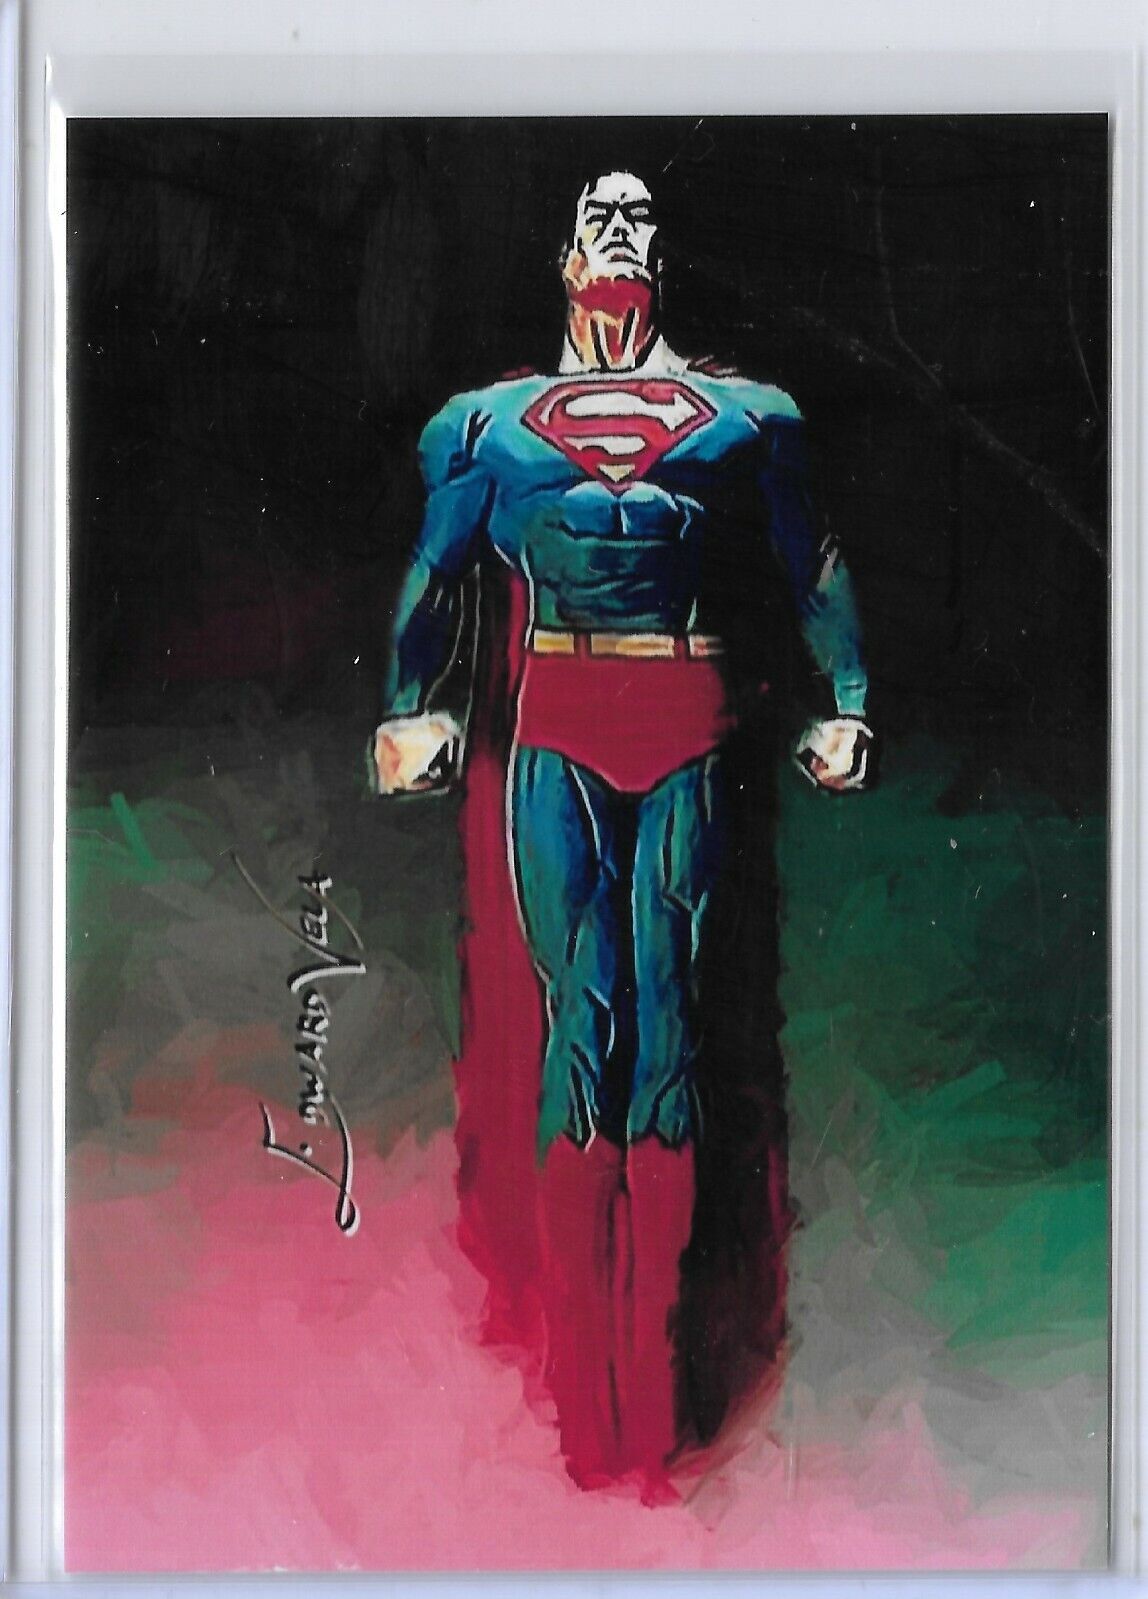 Superman 2016 Authentic Artist Signed Limited Edition Print Card 20 of 25.